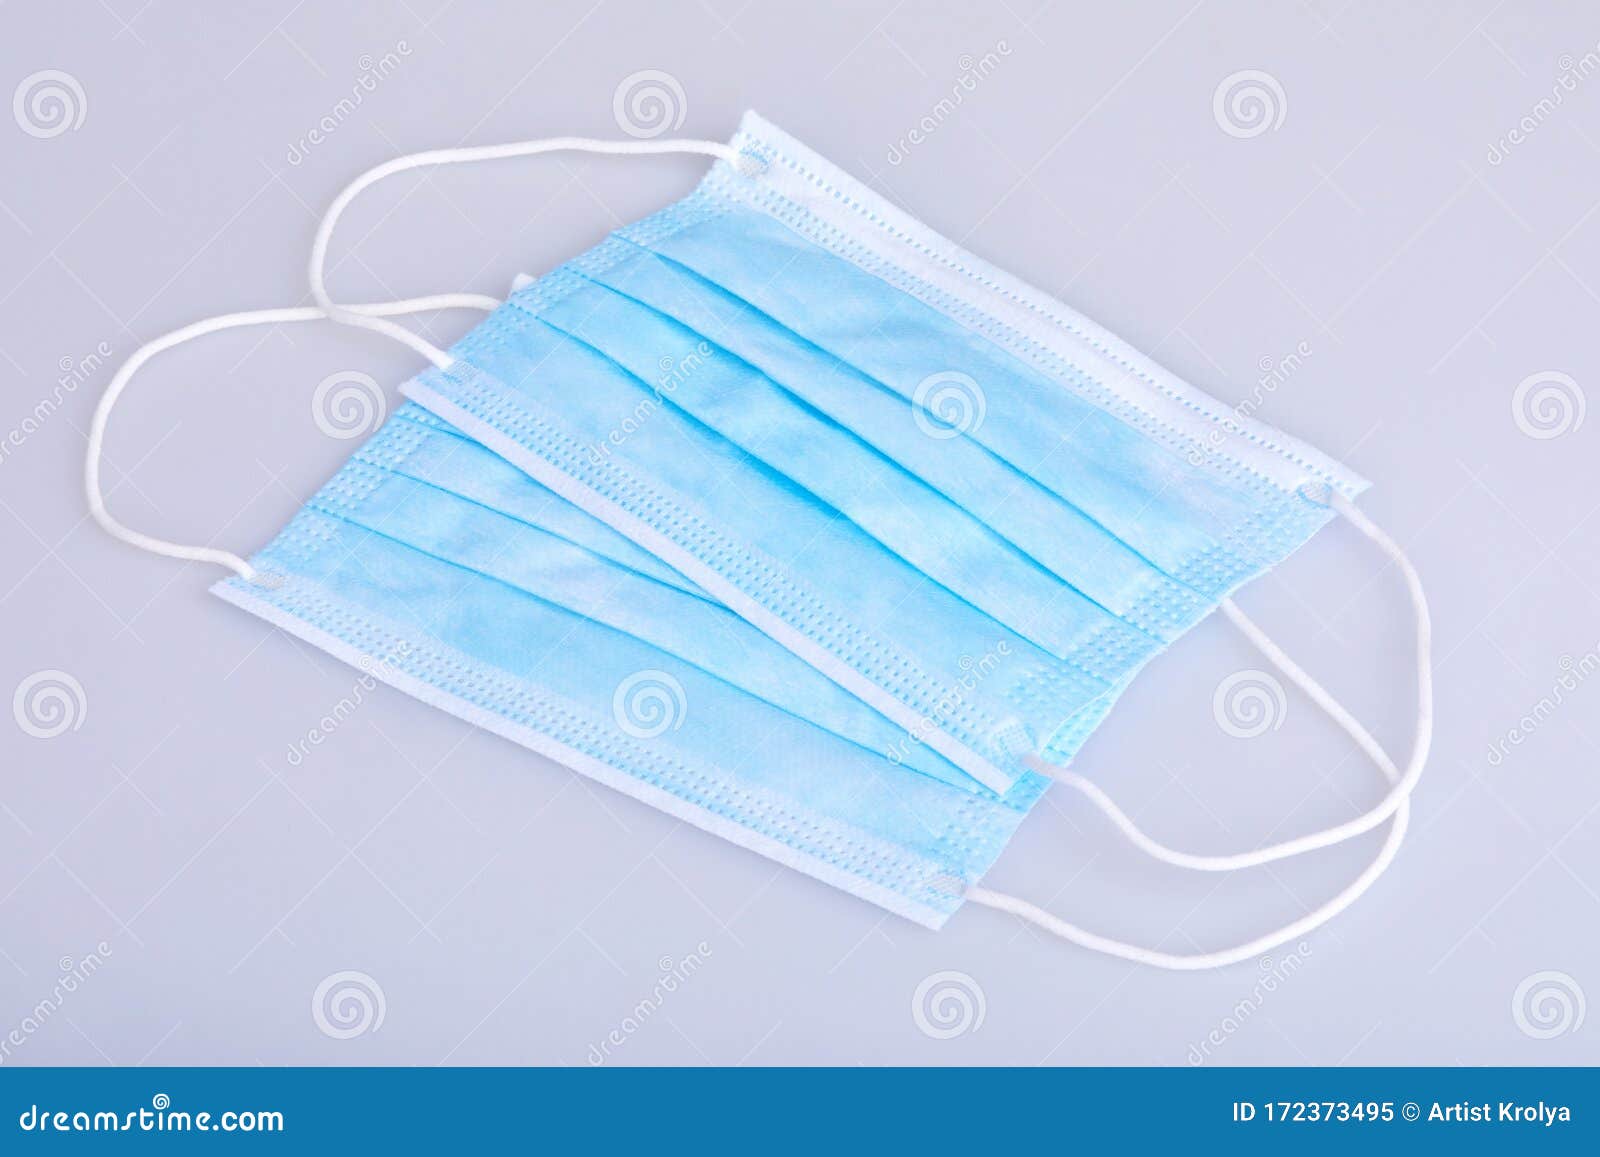 two blue disposable face masks on white background.